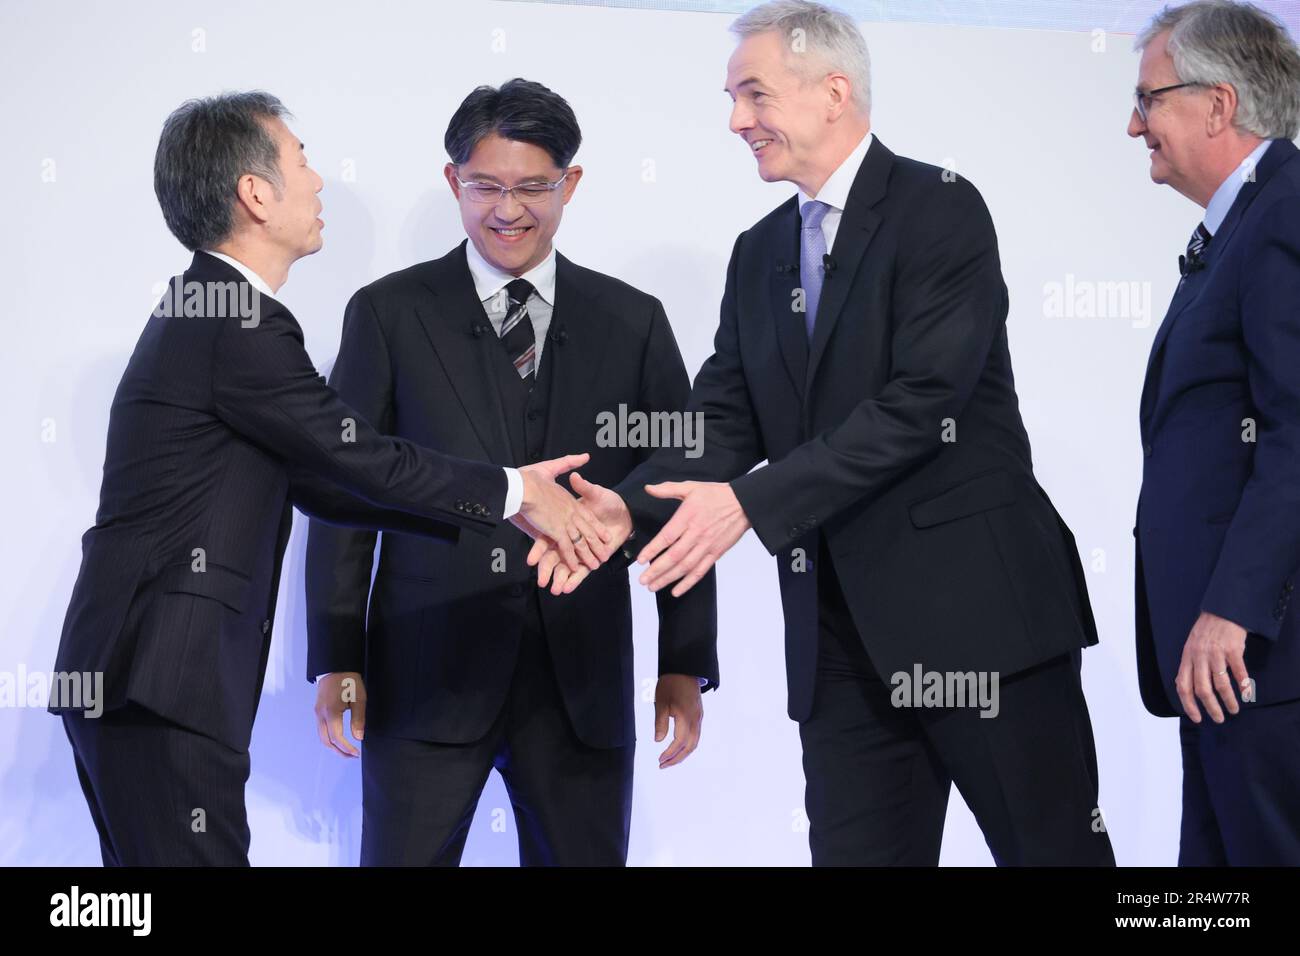 Tuesday. 30th May, 2023. Tokyo, Japan. 30th May, 2023. Japan's Hino Motors CEO Satoshi Ogiso (L) shakes hands with Daimler's subsidiary MFTBC (Mitsubishi Fuso) CEO Karl Depper (2nd R) while Toyota Motor CEO Koji Sato (2nd L) and Germany's Daimler Truck CEO Martin Daum look on as they announce Hino and MFTBC will merge their businesses and Toyota and Daimler Truck will form a holding company at a press conference in Tokyo on Tuesday, May 30, 2023. (photo by Yoshio Tsunoda/AFLO) Stock Photo